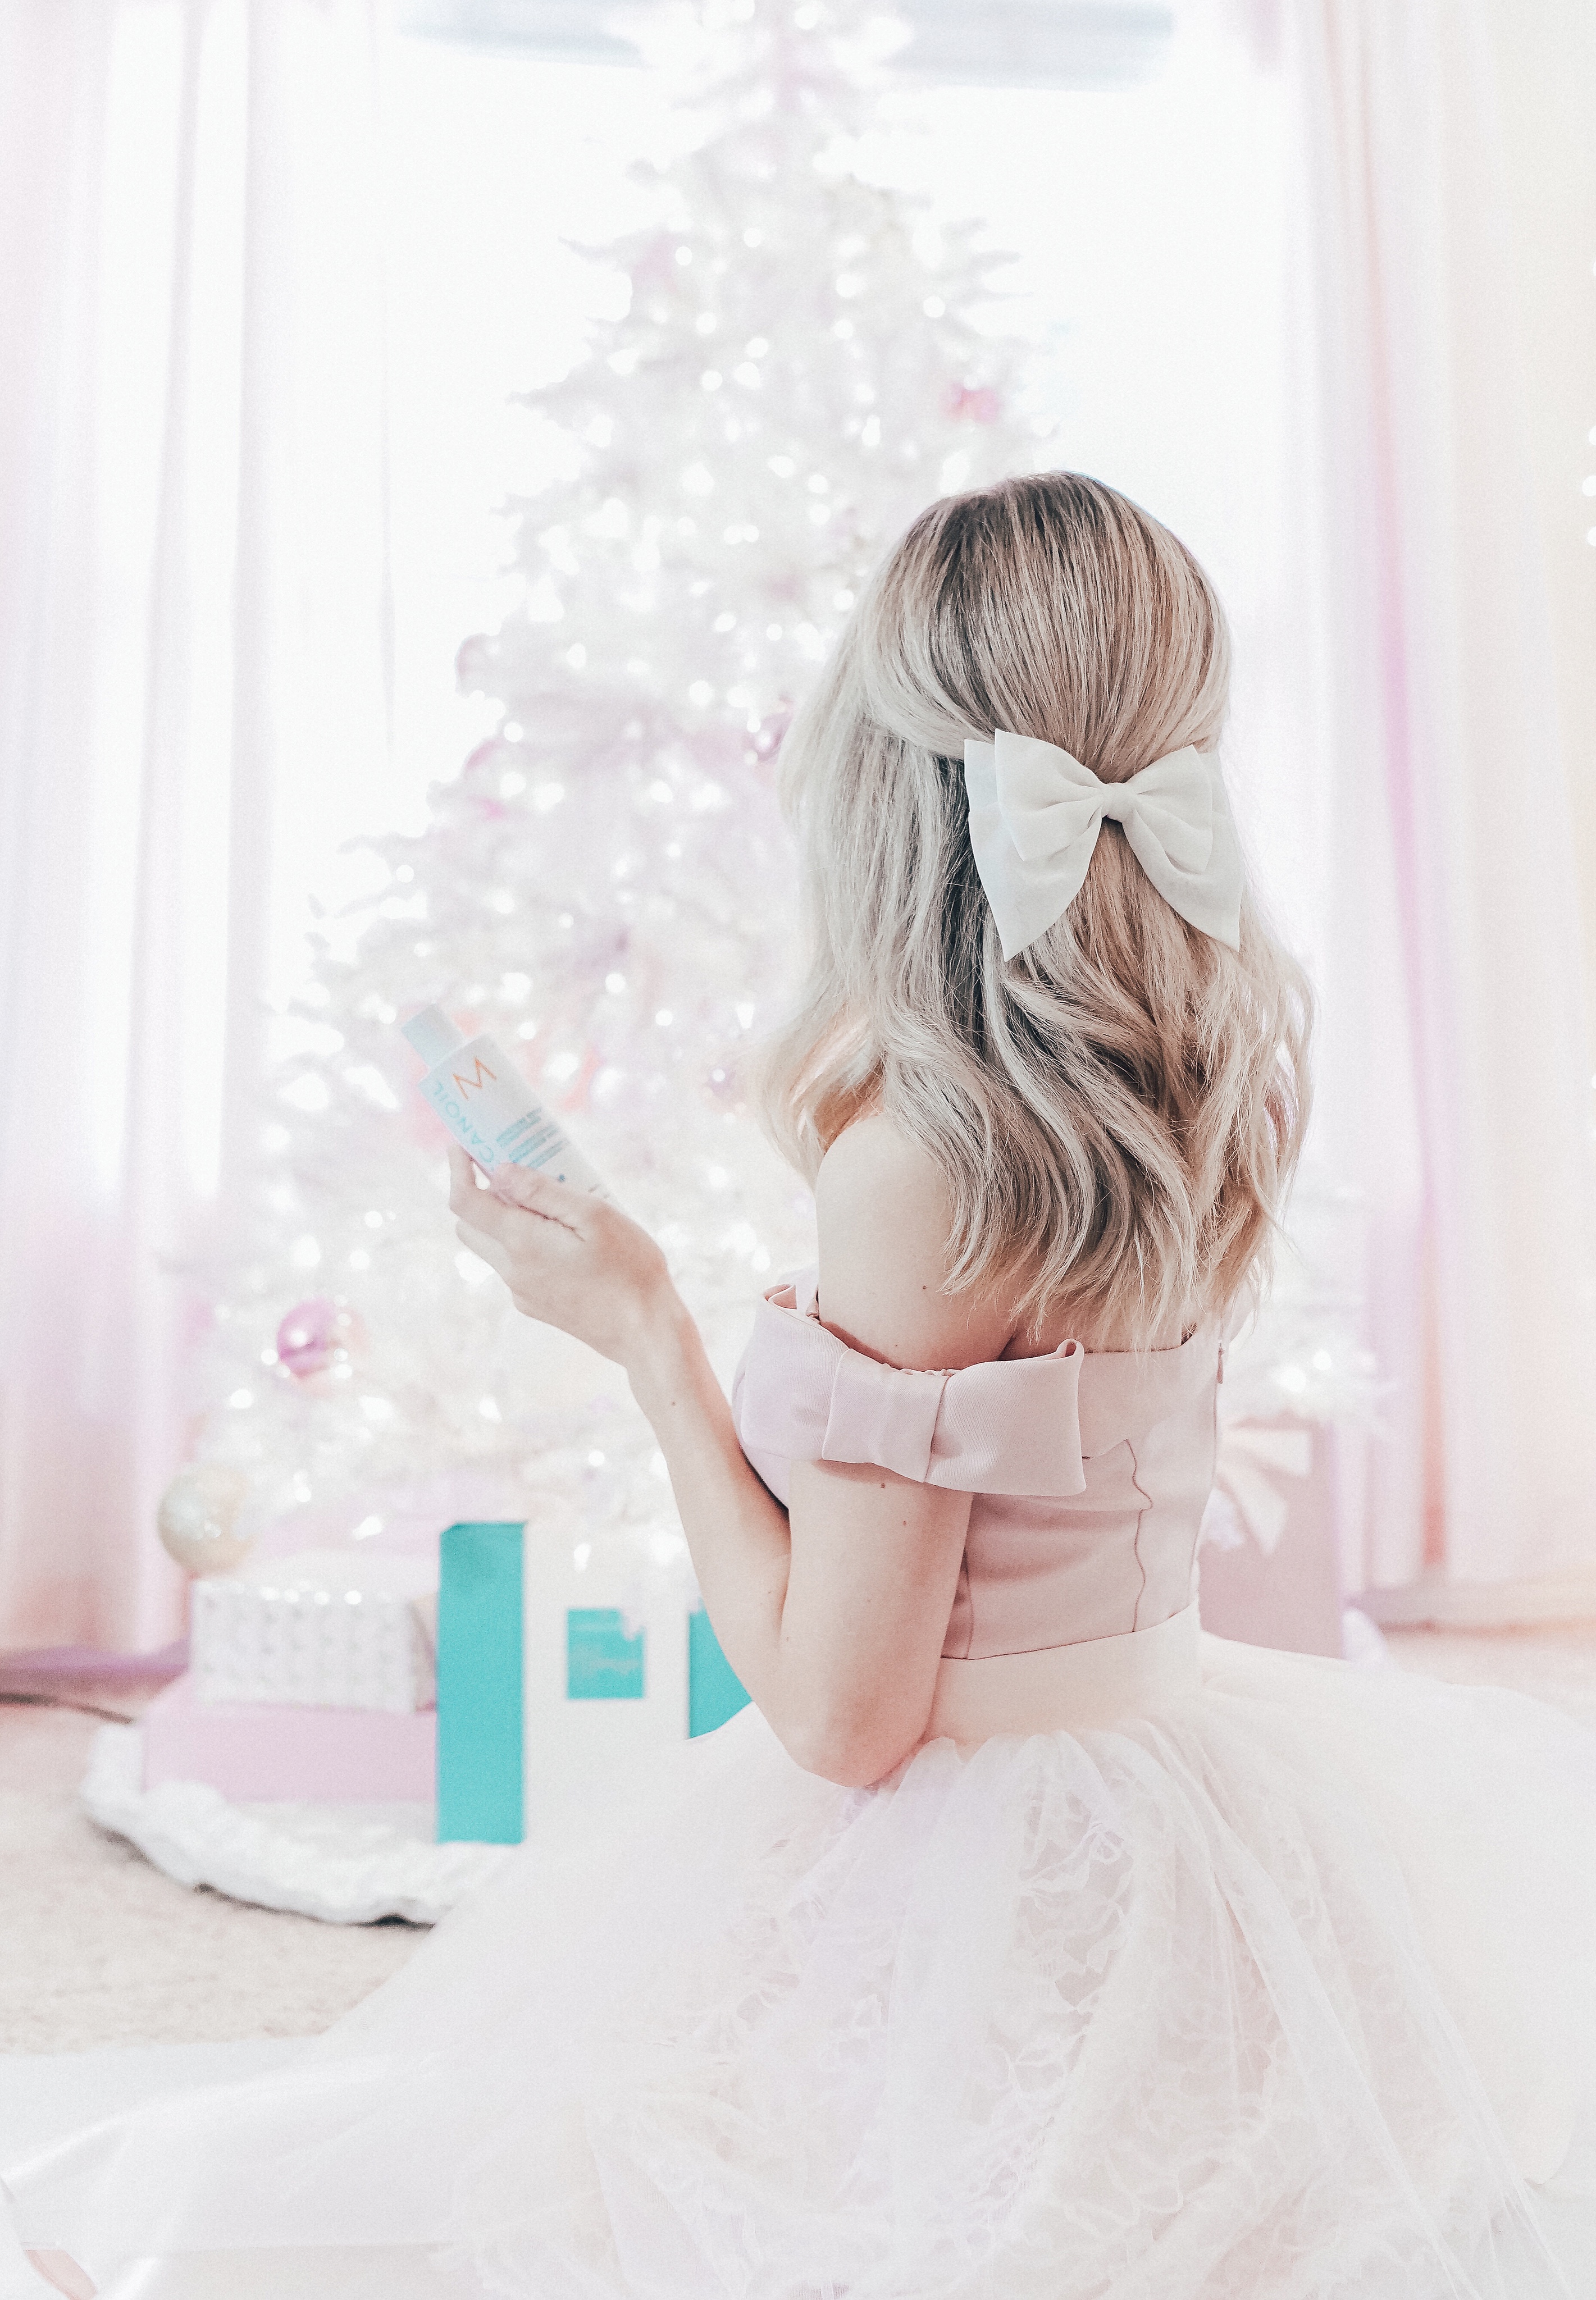 Hair Care Gifts That Should Be At The Top of Your Holiday Shopping List